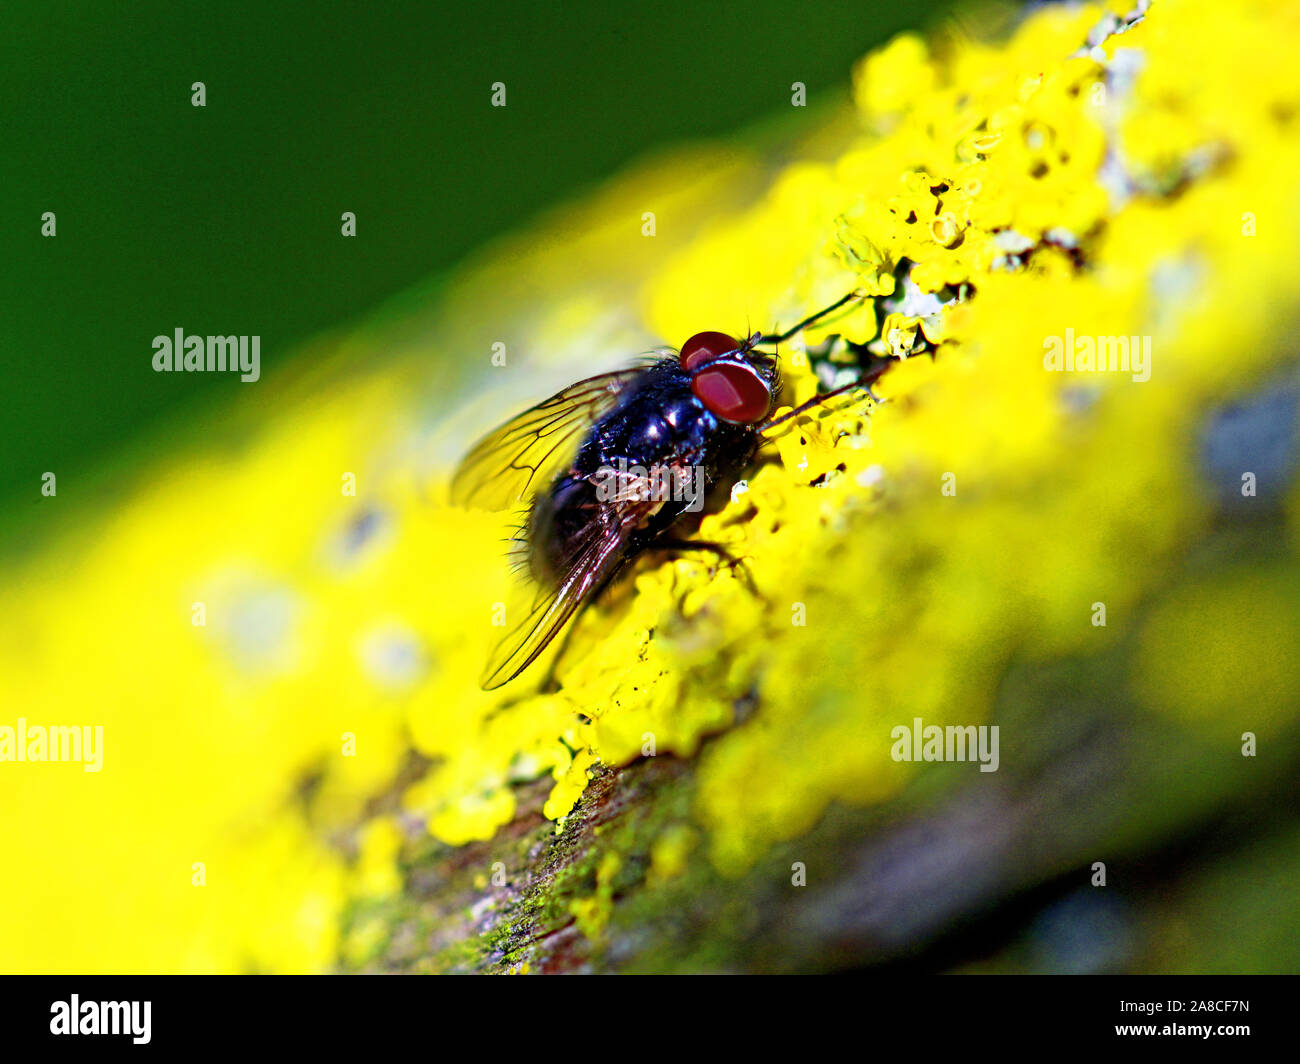 Common fly on yellow tree lichen against muted green background Stock Photo